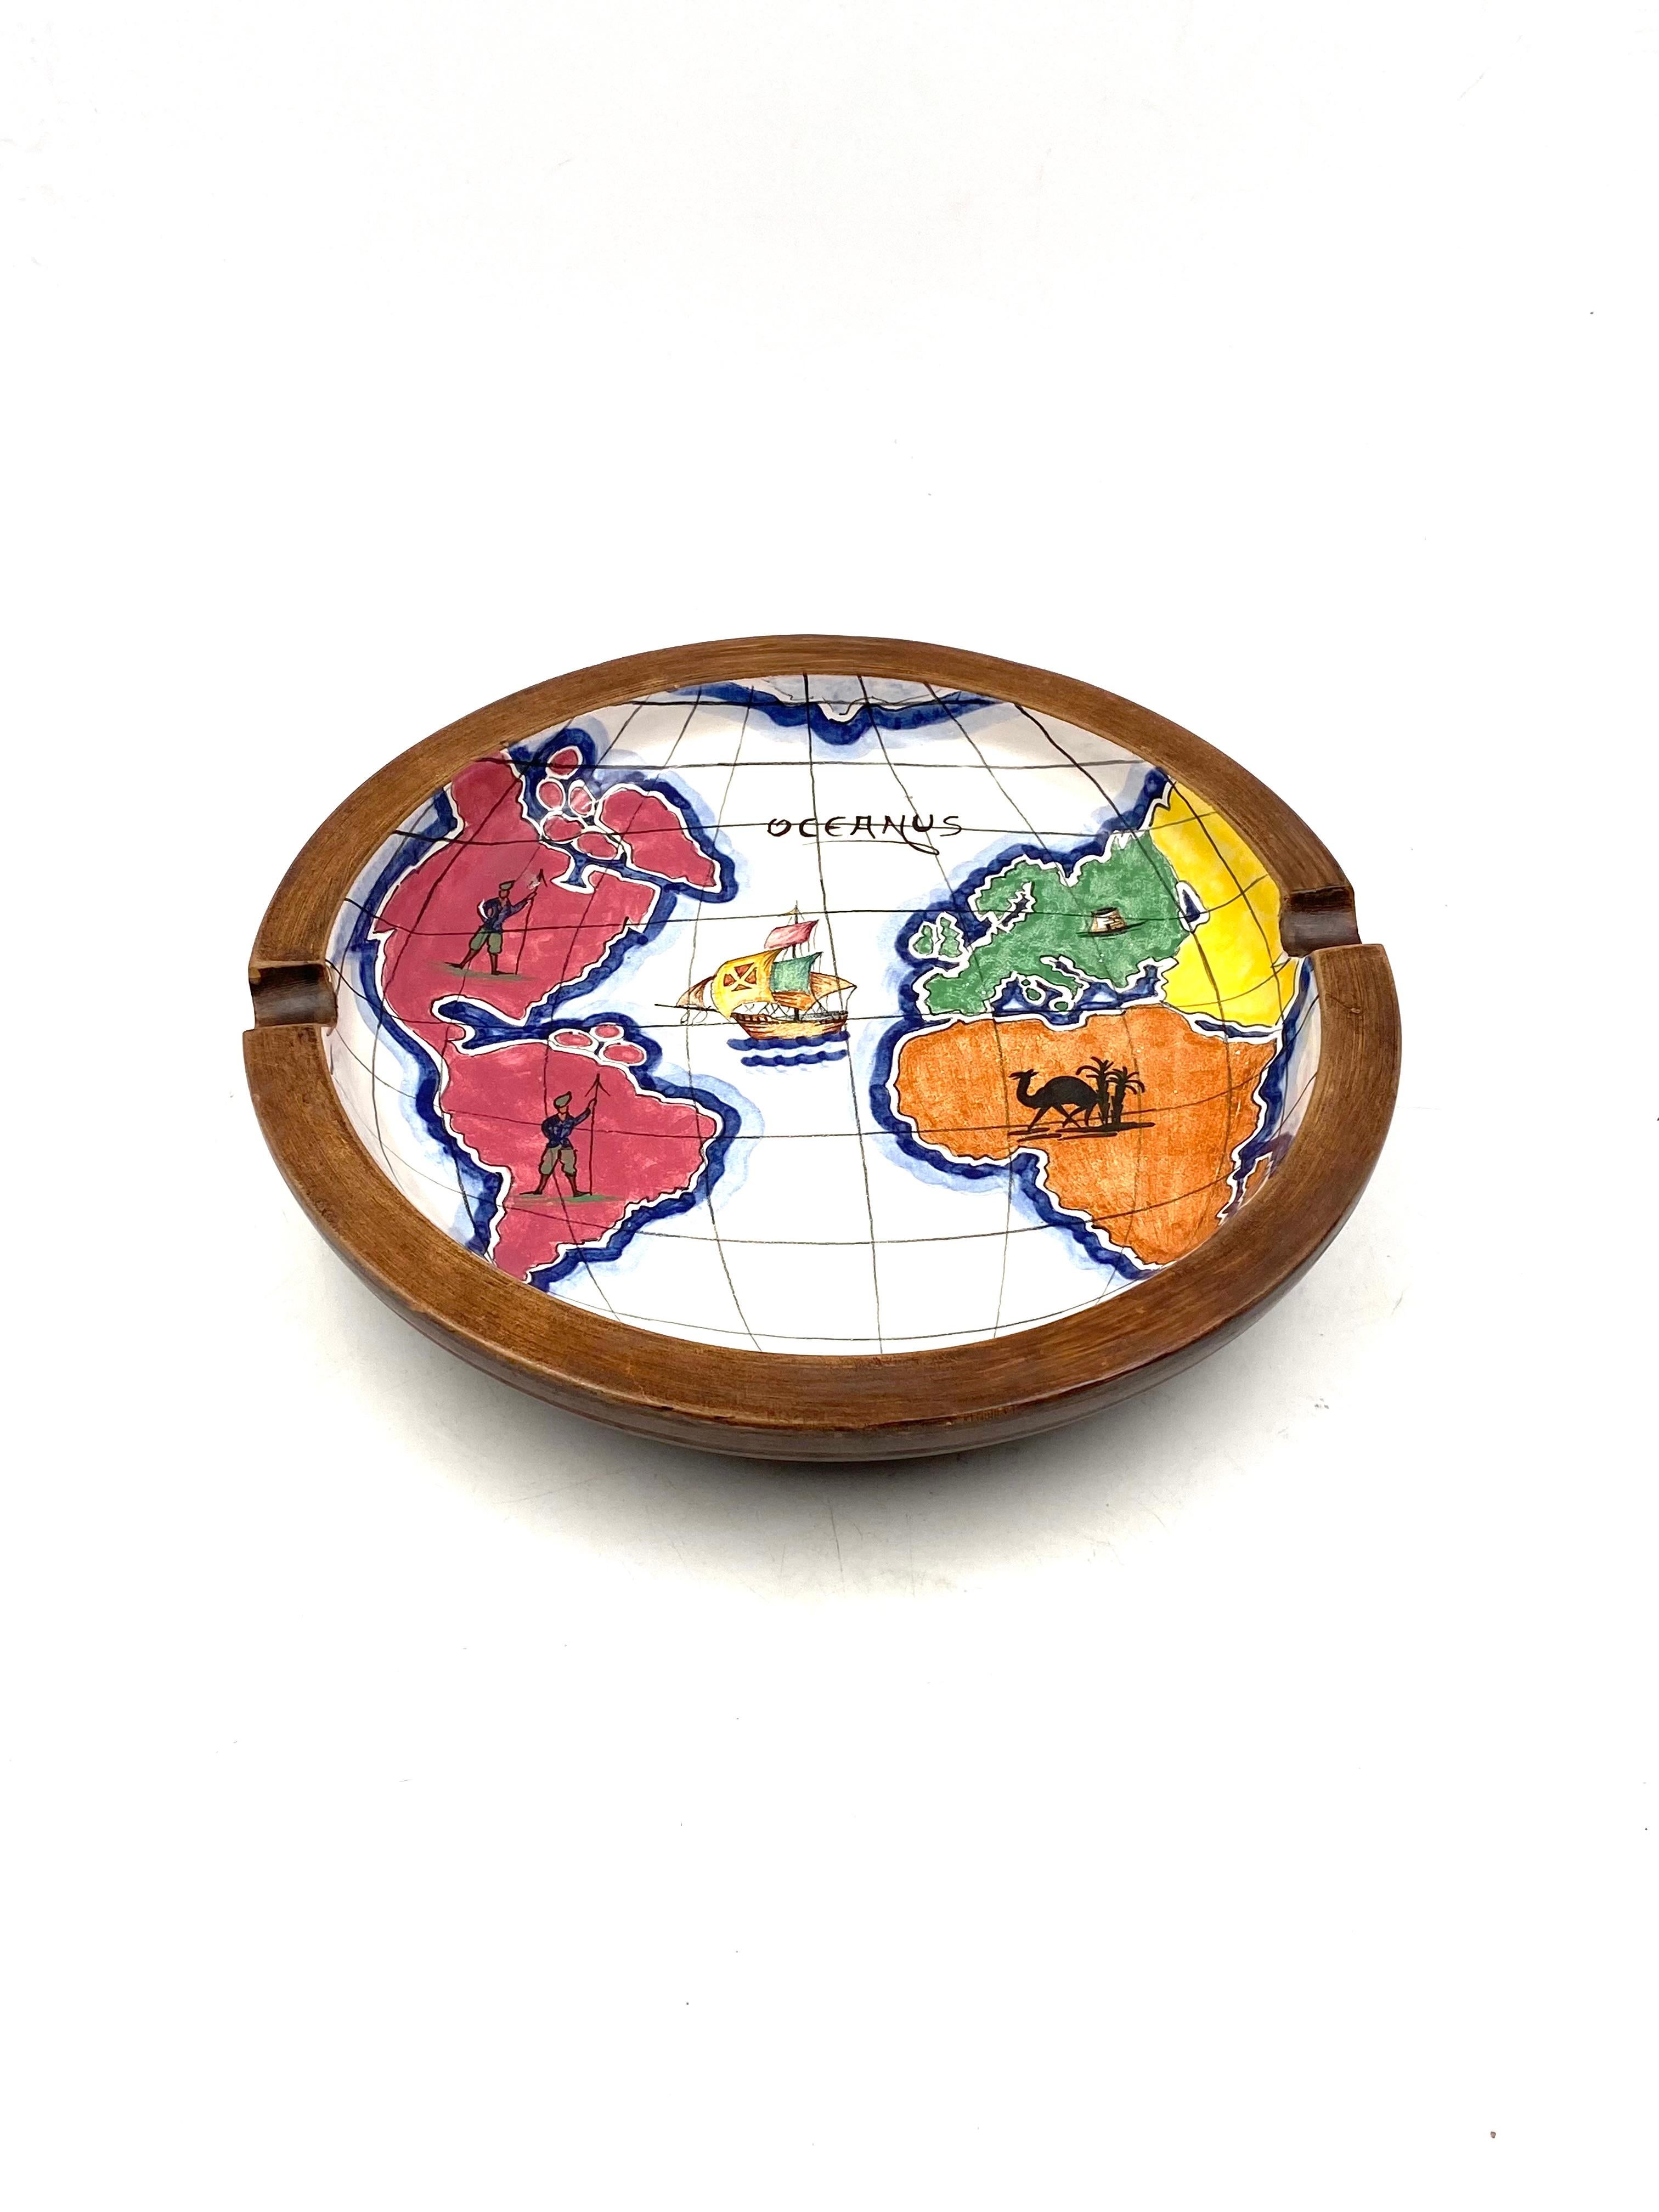 Polychrome Ceramic World Map Catchall / Ashtray, Zaccagnini, Italy, 1940s For Sale 4